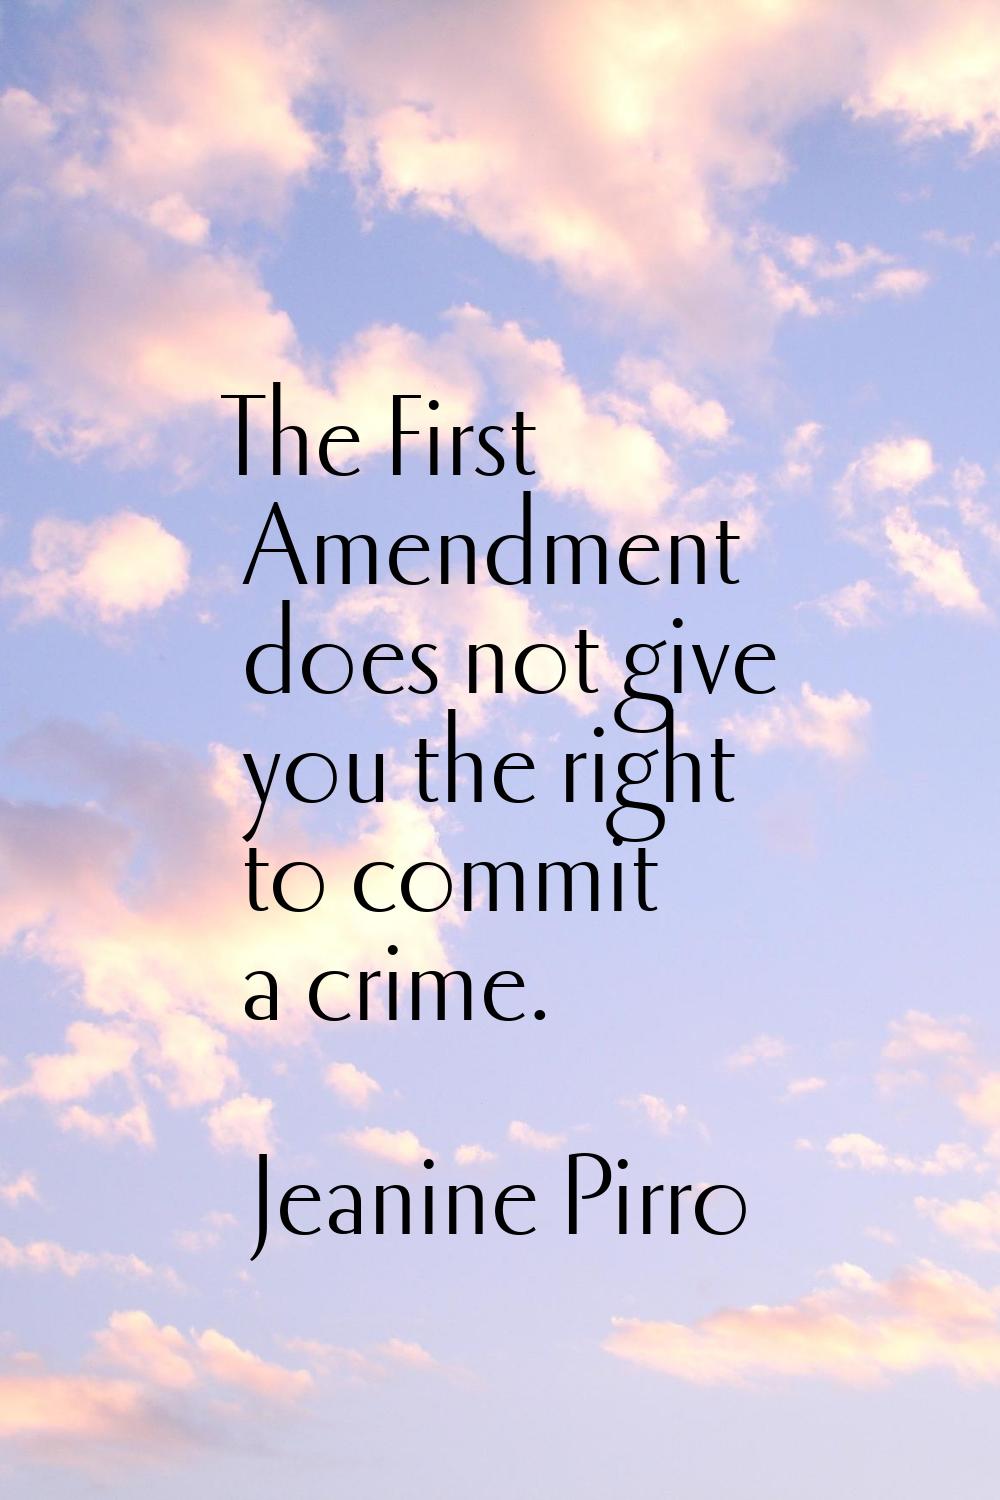 The First Amendment does not give you the right to commit a crime.